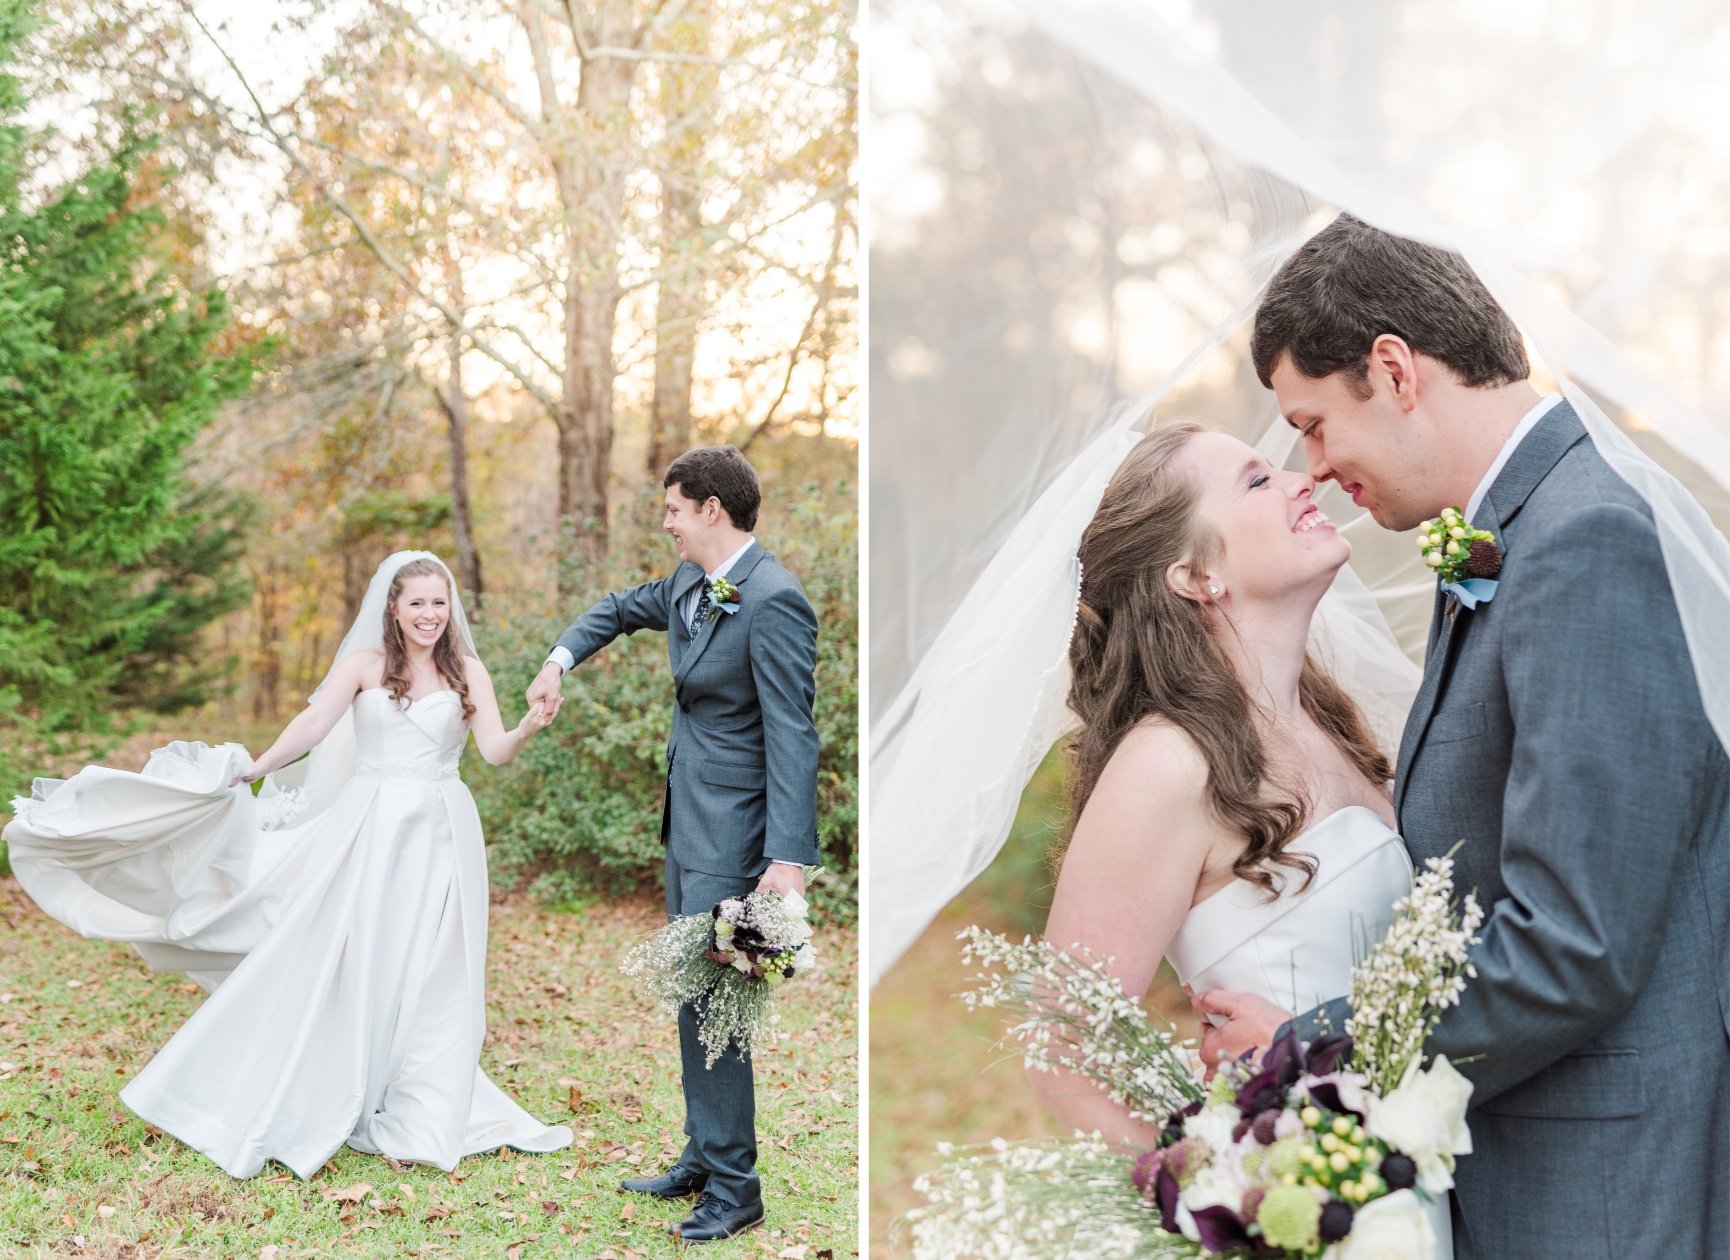 Garden Party Wedding Theme in Greenville, Alabama (AL) Photographed by Kristen Marcus Photography